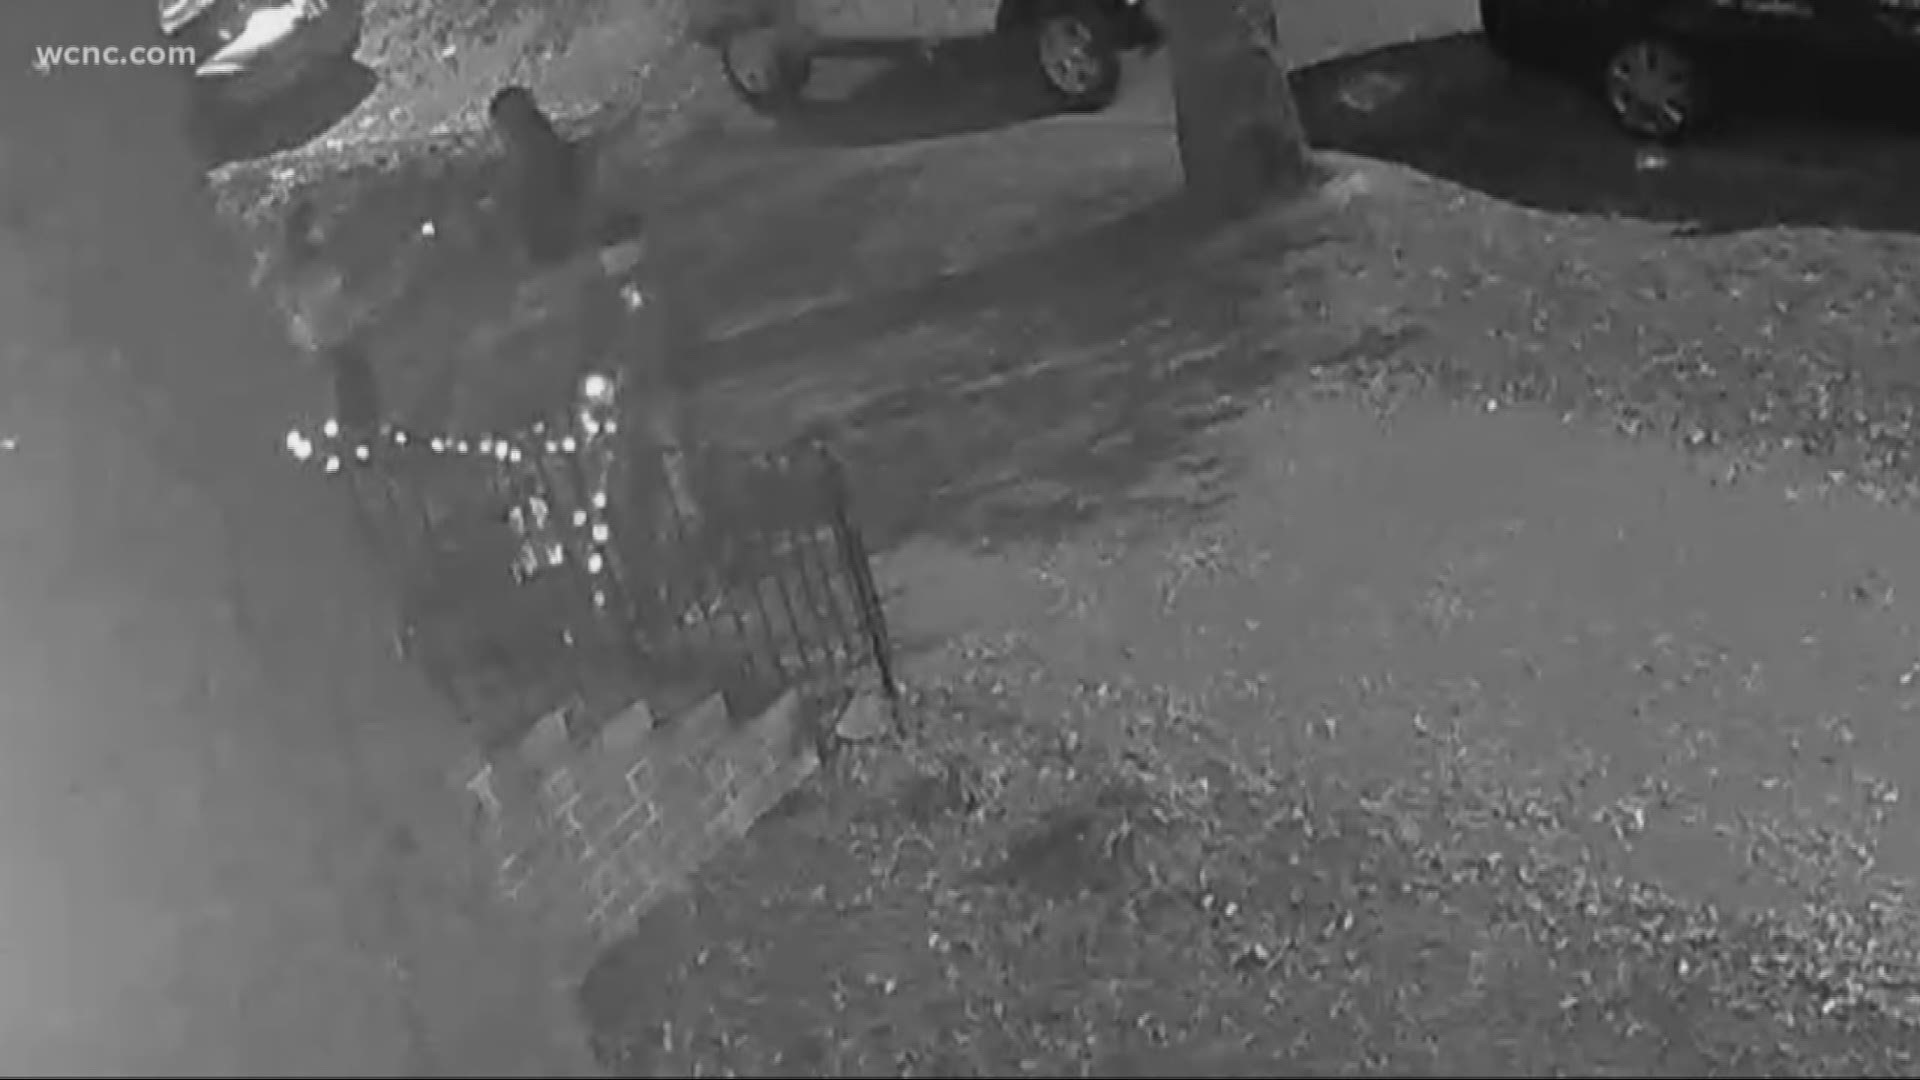 Surveillance video shows someone tearing out the Christmas lights from a South End home. The person was walking on West Bland Street with two others at the time.